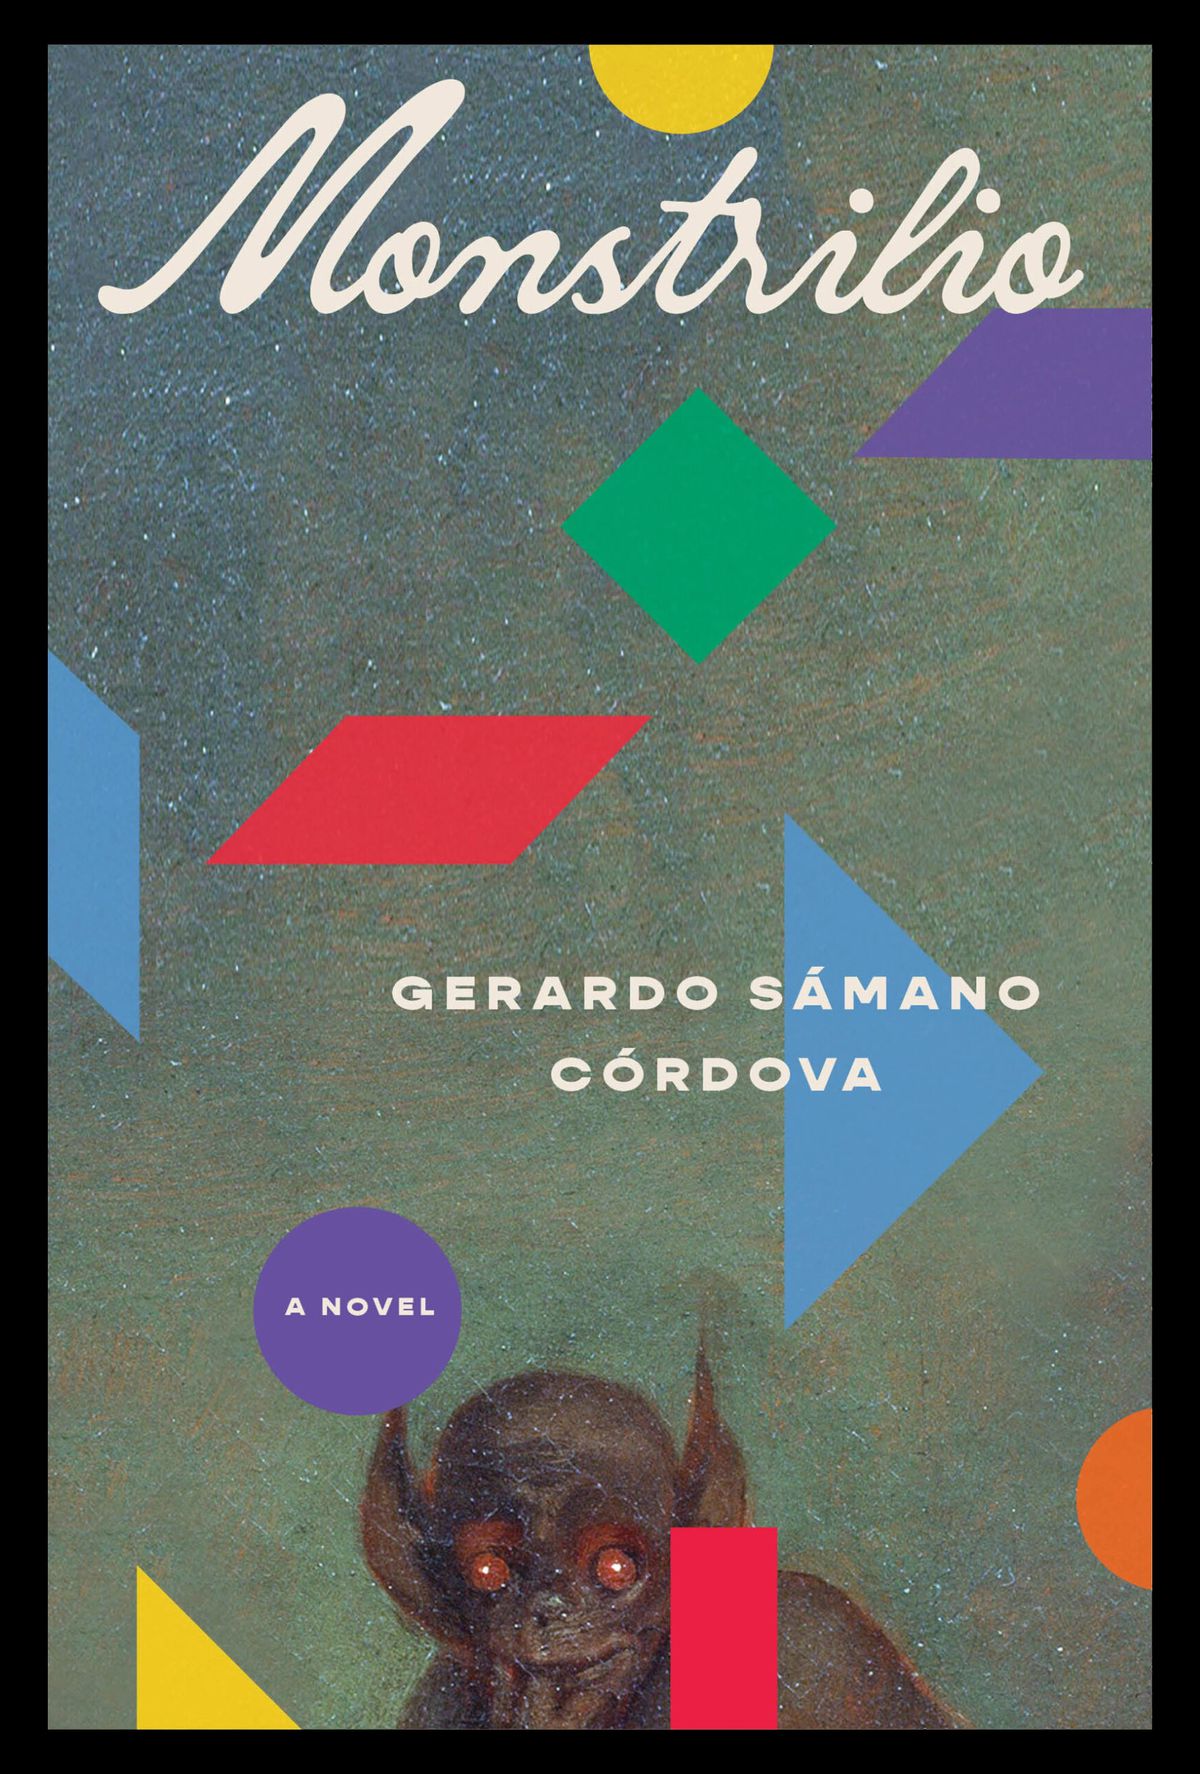 Cover image for Gerardo Sámano Córdova’s Monstrilio, which features a little monster with bat ears at the bottom of the page, and colored shapes scattered around the cover.